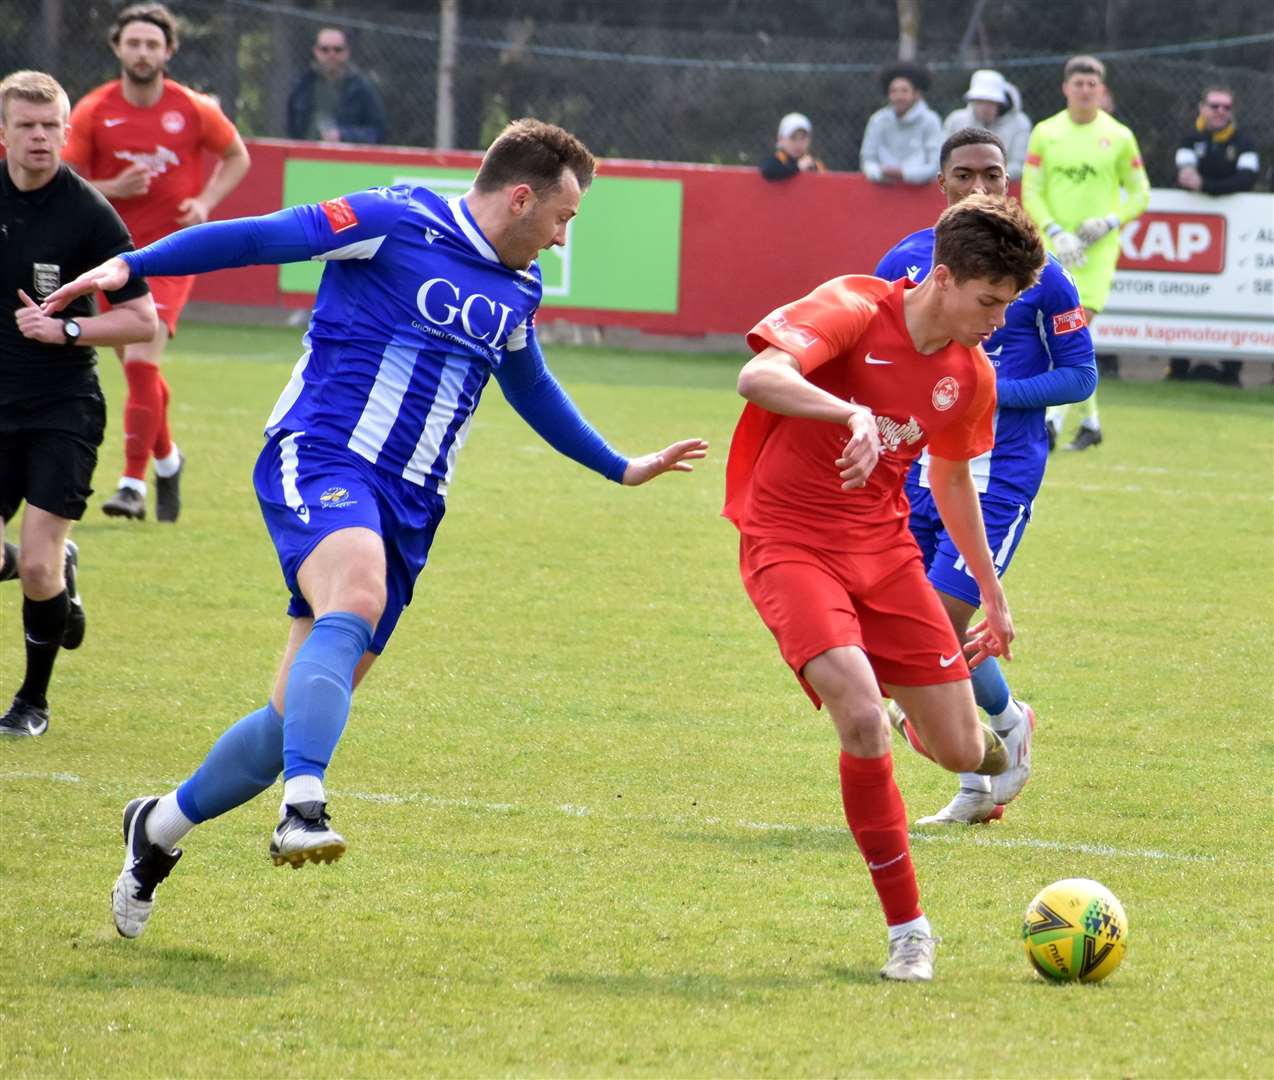 Hythe Town finished the season with a 1-1 draw against East Grinstead Picture: Randolph File